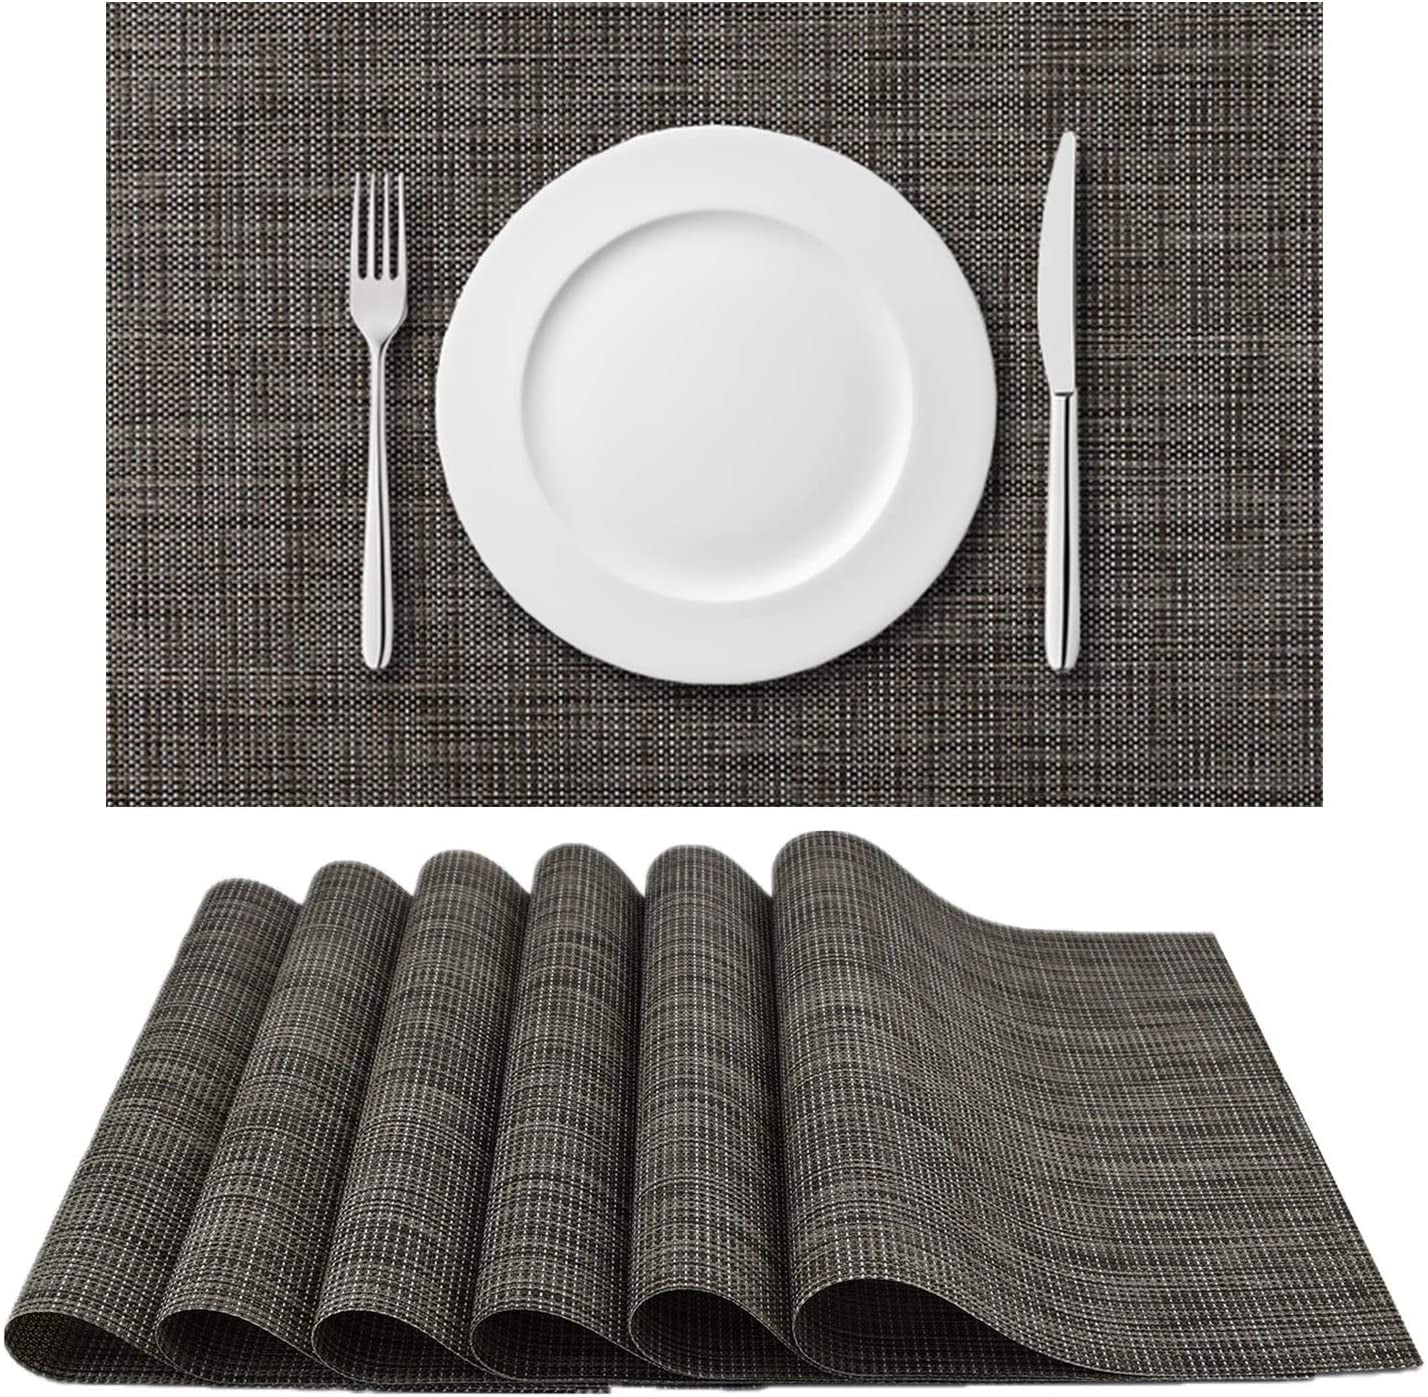 Placemats Placemat For Dining Table Woven Placemats Heat Resistant Non Slip Place Mats Table Mats Set Of 6 Grey Walmart Com